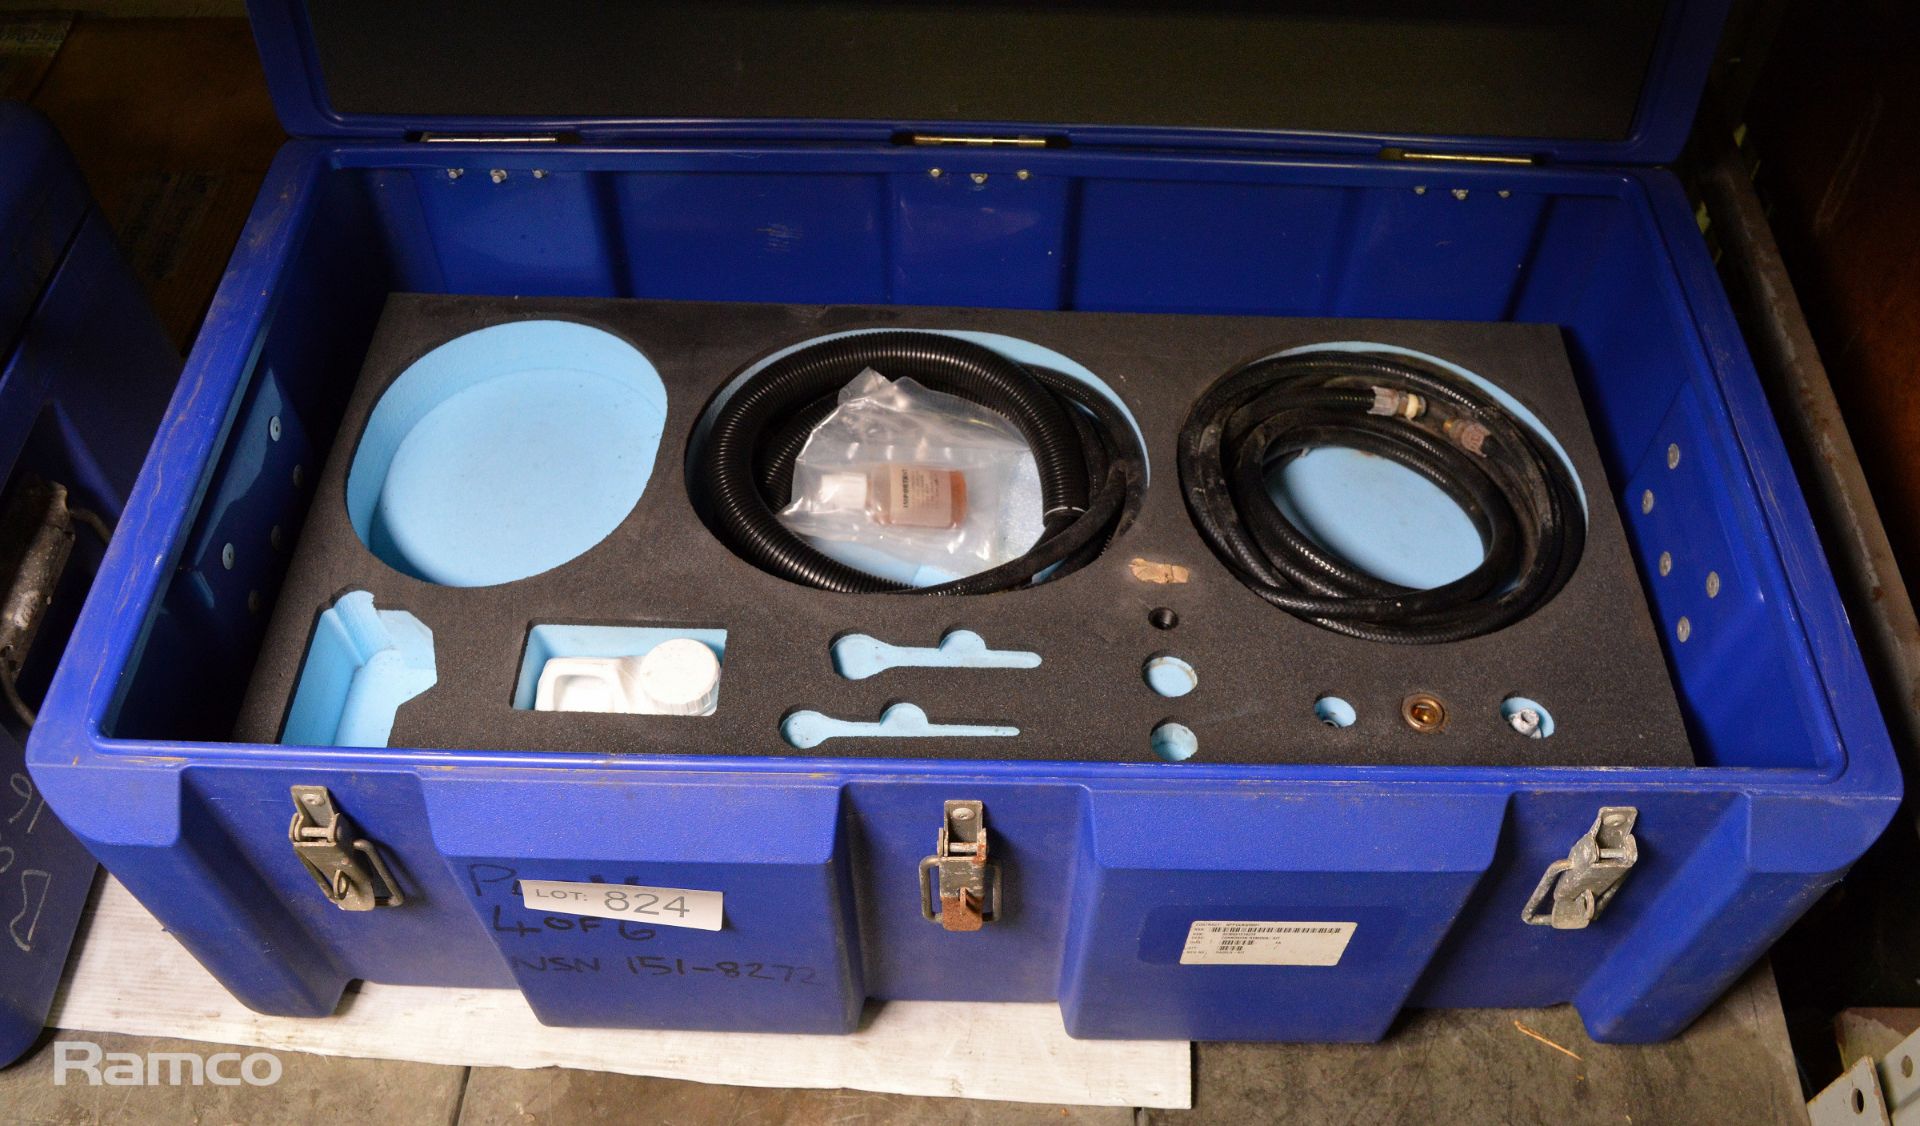 Corrosion removal kit in carry case - Image 7 of 9